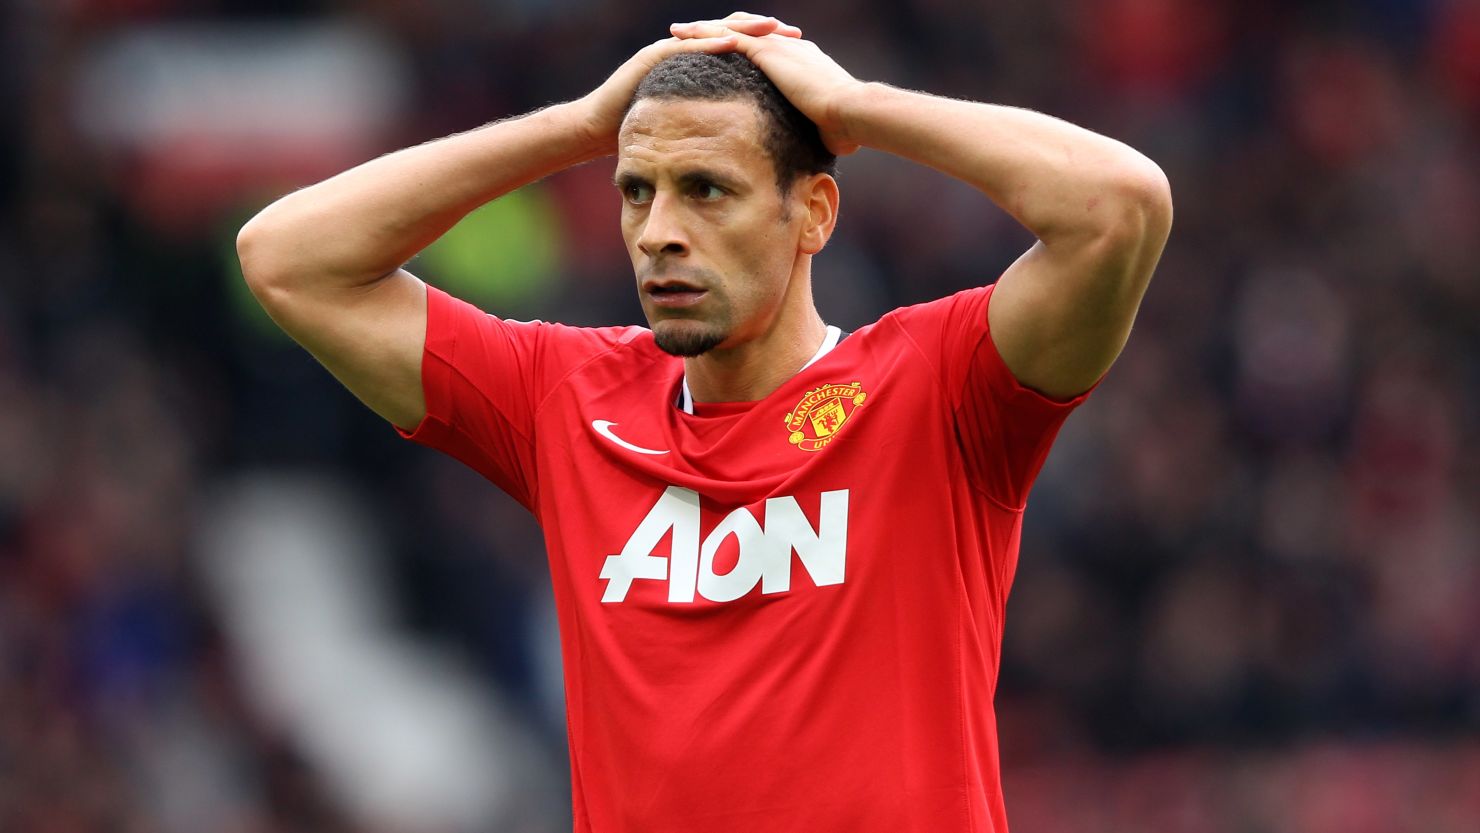 Rio Ferdinand has collected 81 England caps since making his debut in 1997.